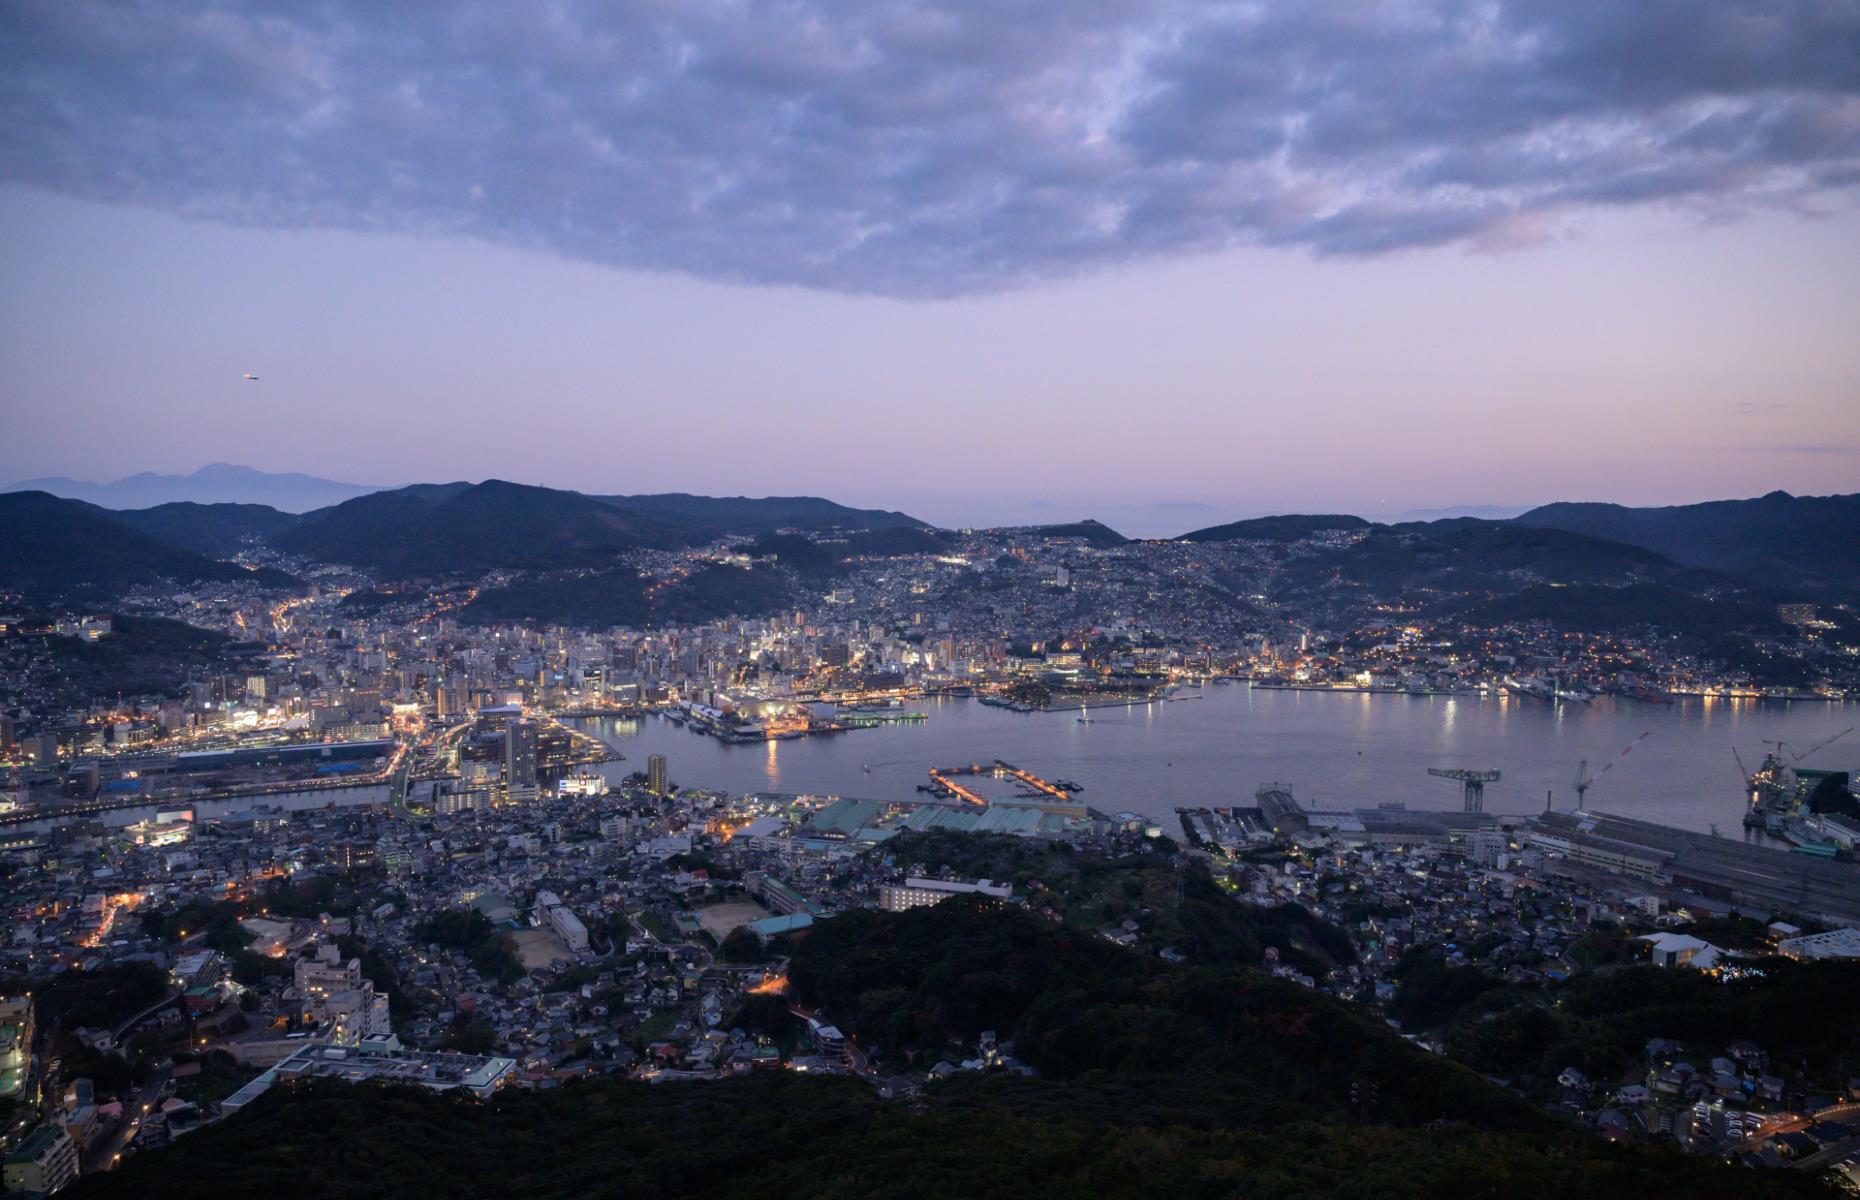 <p>With its glimmering lights and mountainous backdrop, it’s no surprise that the pretty Nagasaki Port is Japan’s second-biggest cruise destination. Lying at the head of a long bay, liners usually dock at Matsugae Wharf, which is within easy reach of a streetcar stop for exploring the city. Now take a look at <a href="https://www.loveexploring.com/galleries/96347/the-worlds-empty-and-beautiful-beaches-from-above">the world's beautiful beaches from above</a>.</p>